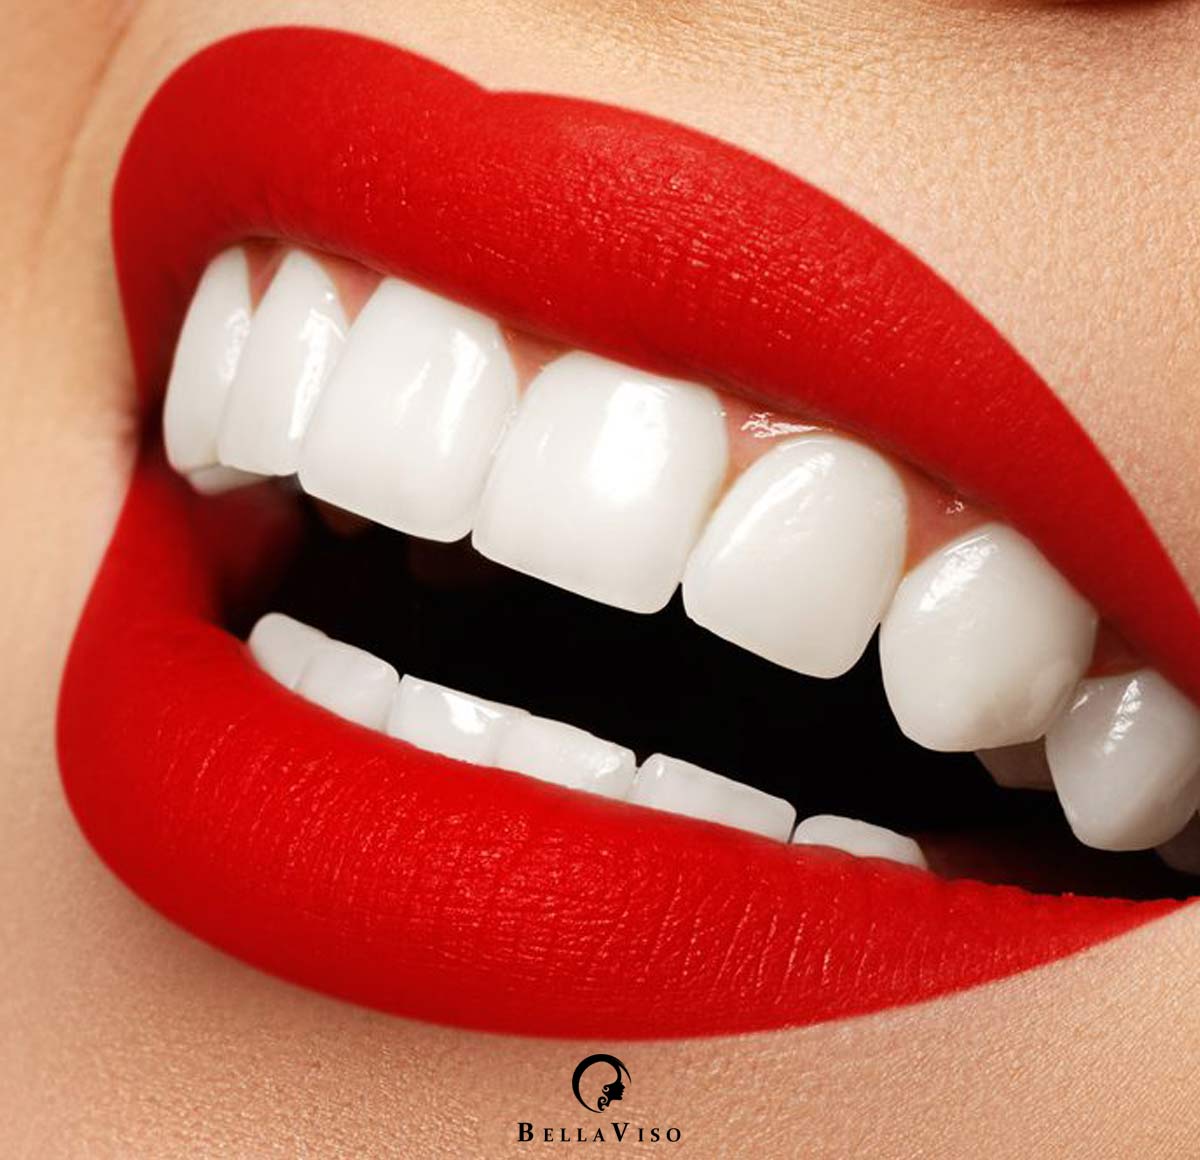 Smile Perfection: Discovering the Best Medical Center for Dental Veneers in Dubai